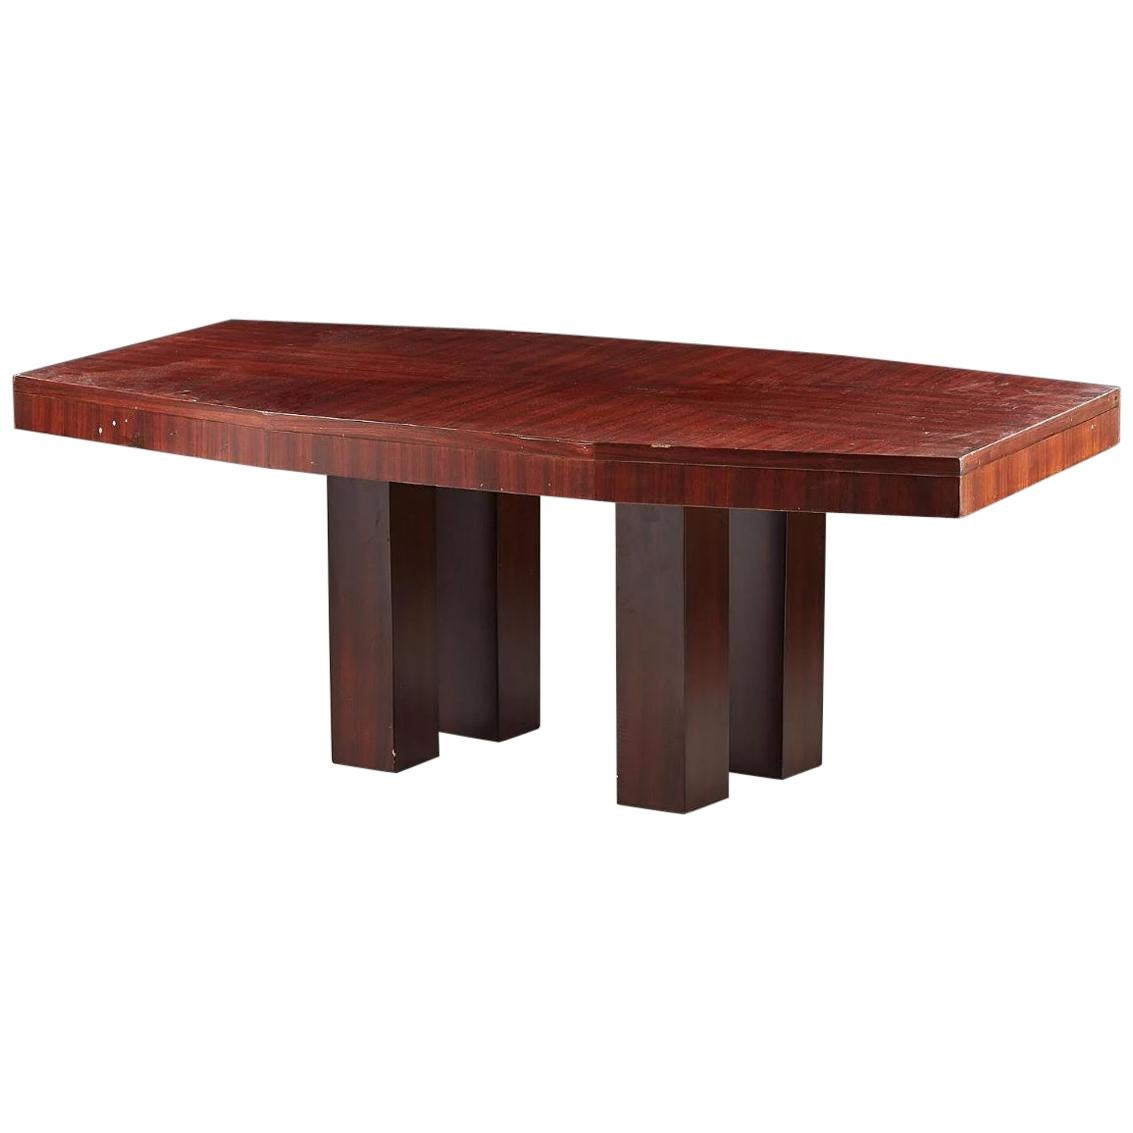 Modernist Art Deco Table circa 1930-1940 Attributed to Jacques Adnet For Sale